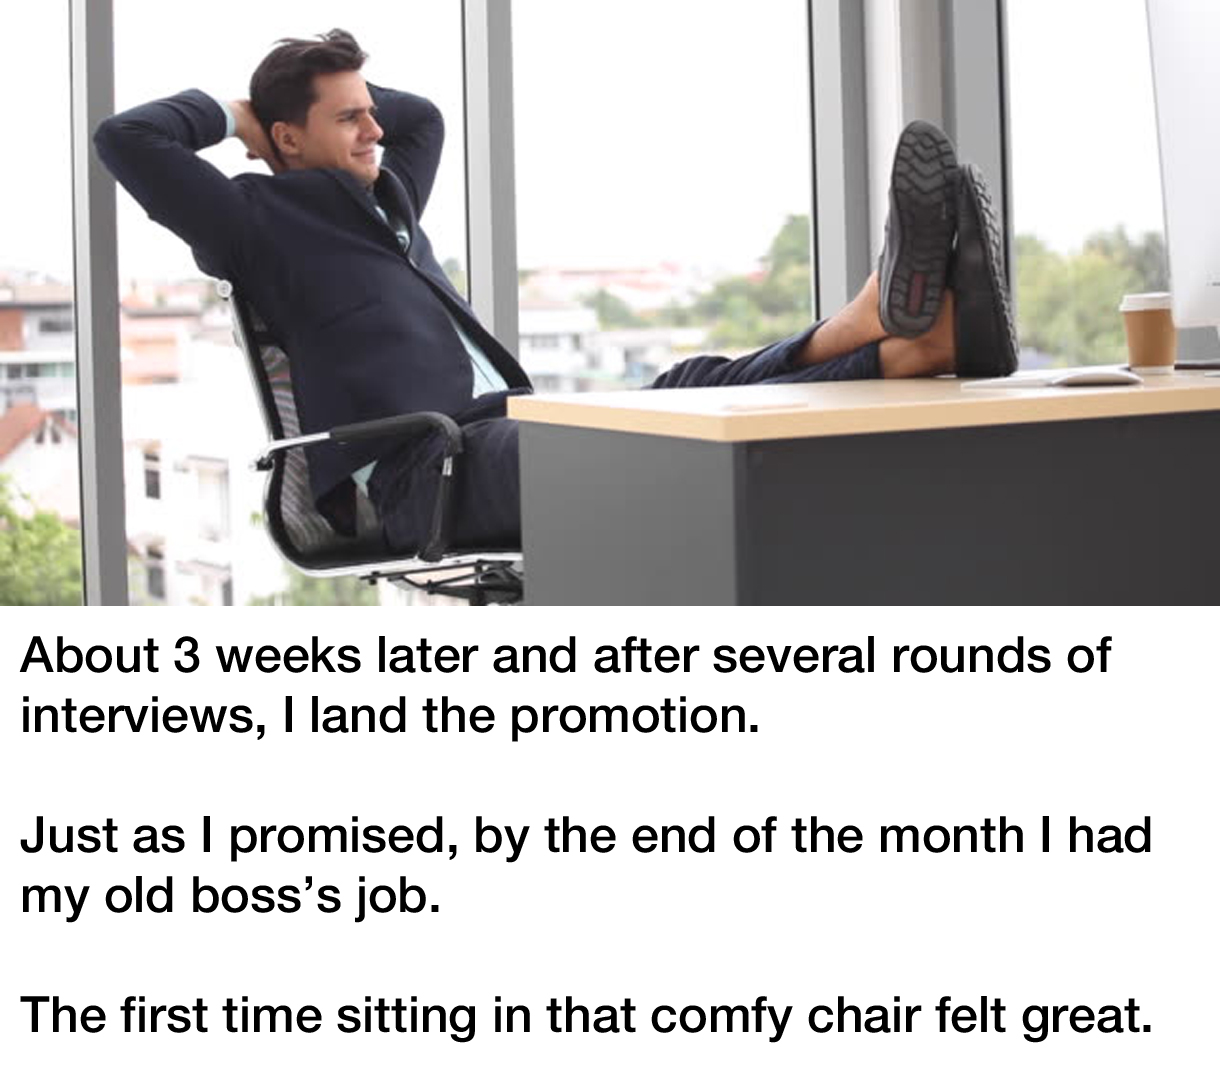 bad manager revenge story reddit - About 3 weeks later and after several rounds of interviews, I land the promotion. Just as I promised, by the end of the month I had my old boss's job. The first time sitting in that comfy chair felt great.